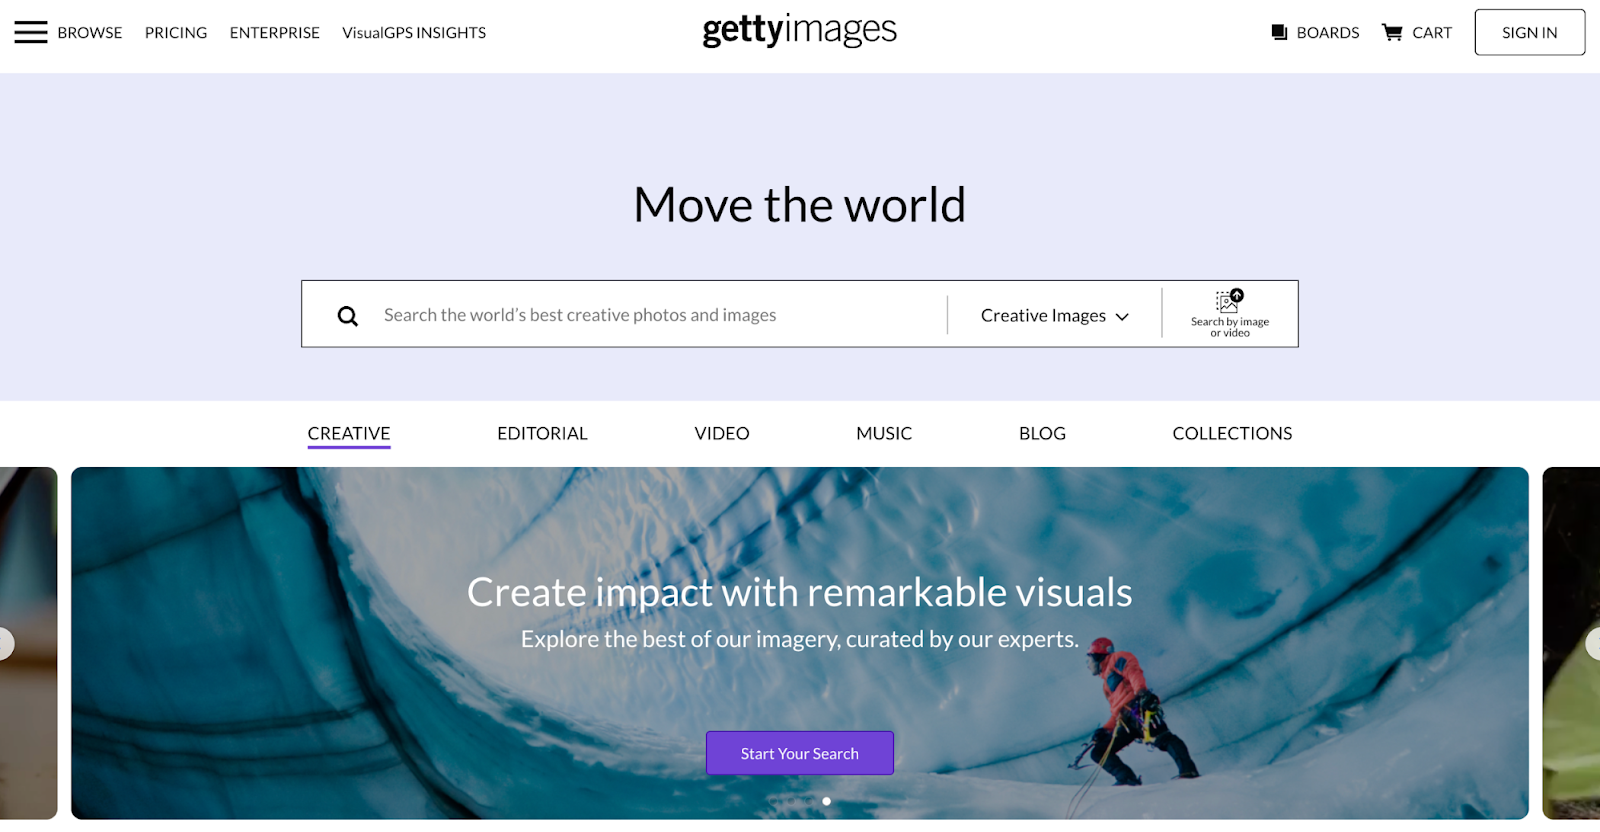 Getty Images website with an image search bar and a menu of different image options and categories.